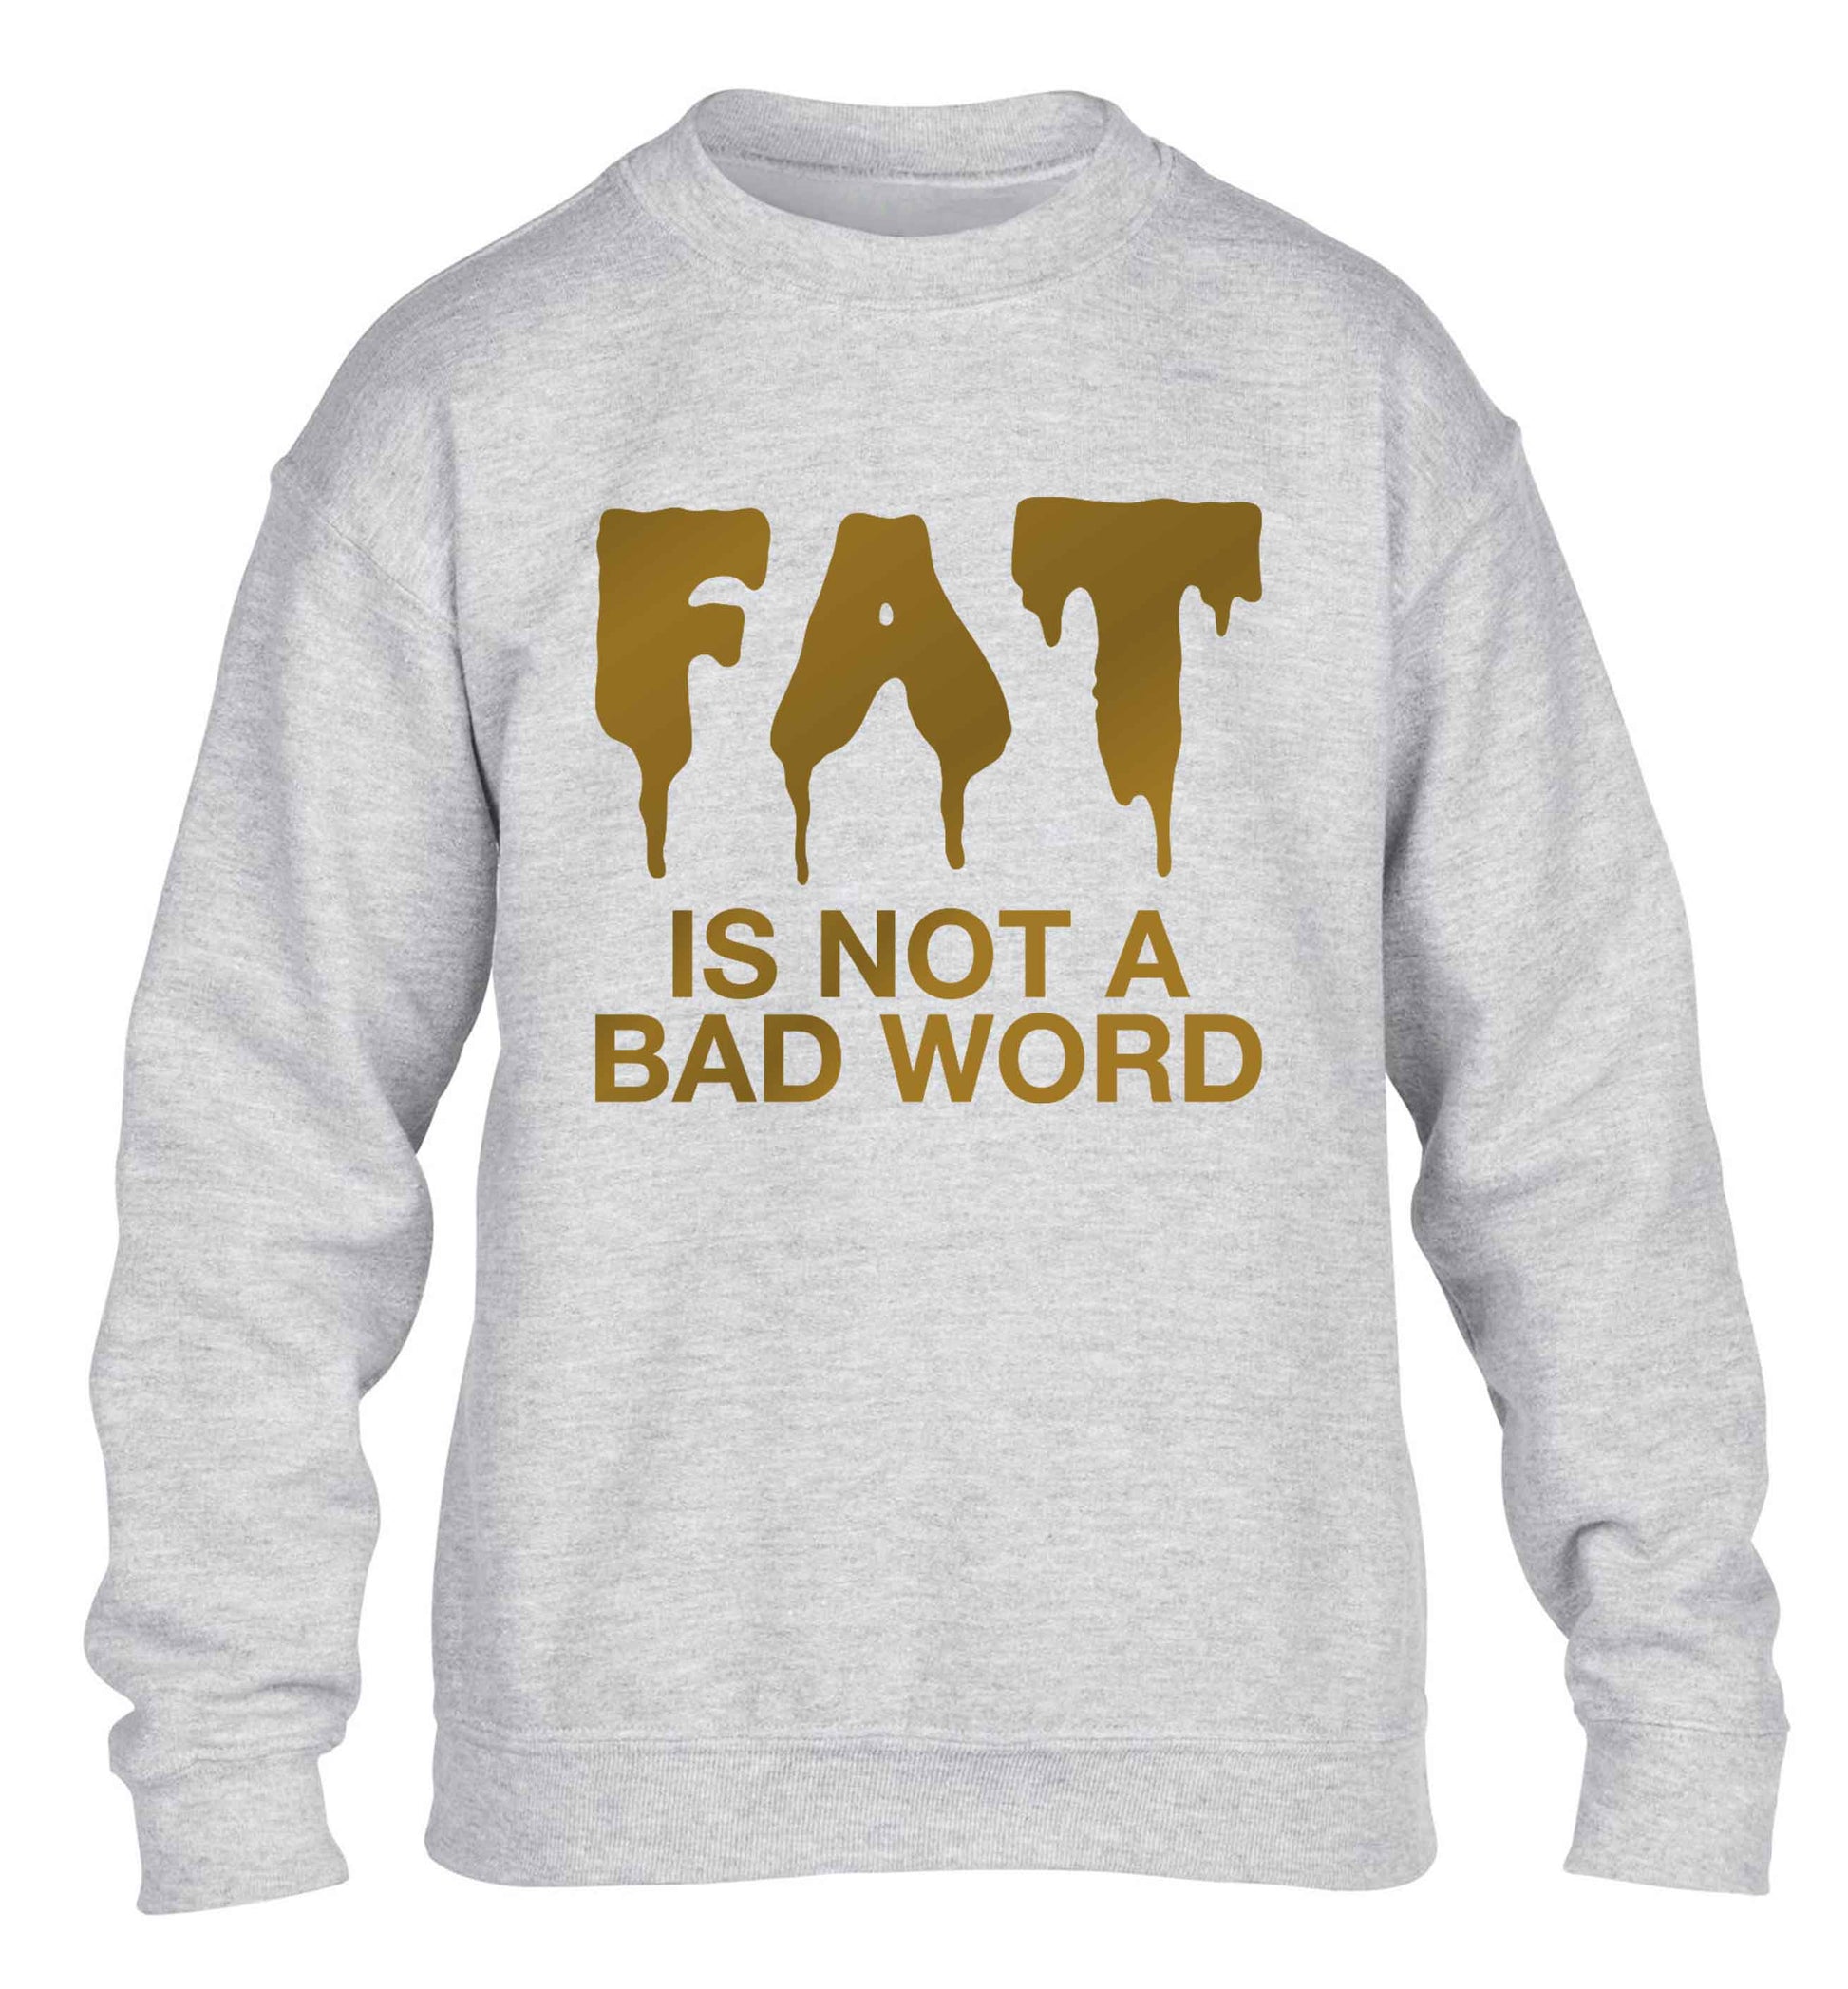 Fat is not a bad word children's grey sweater 12-13 Years